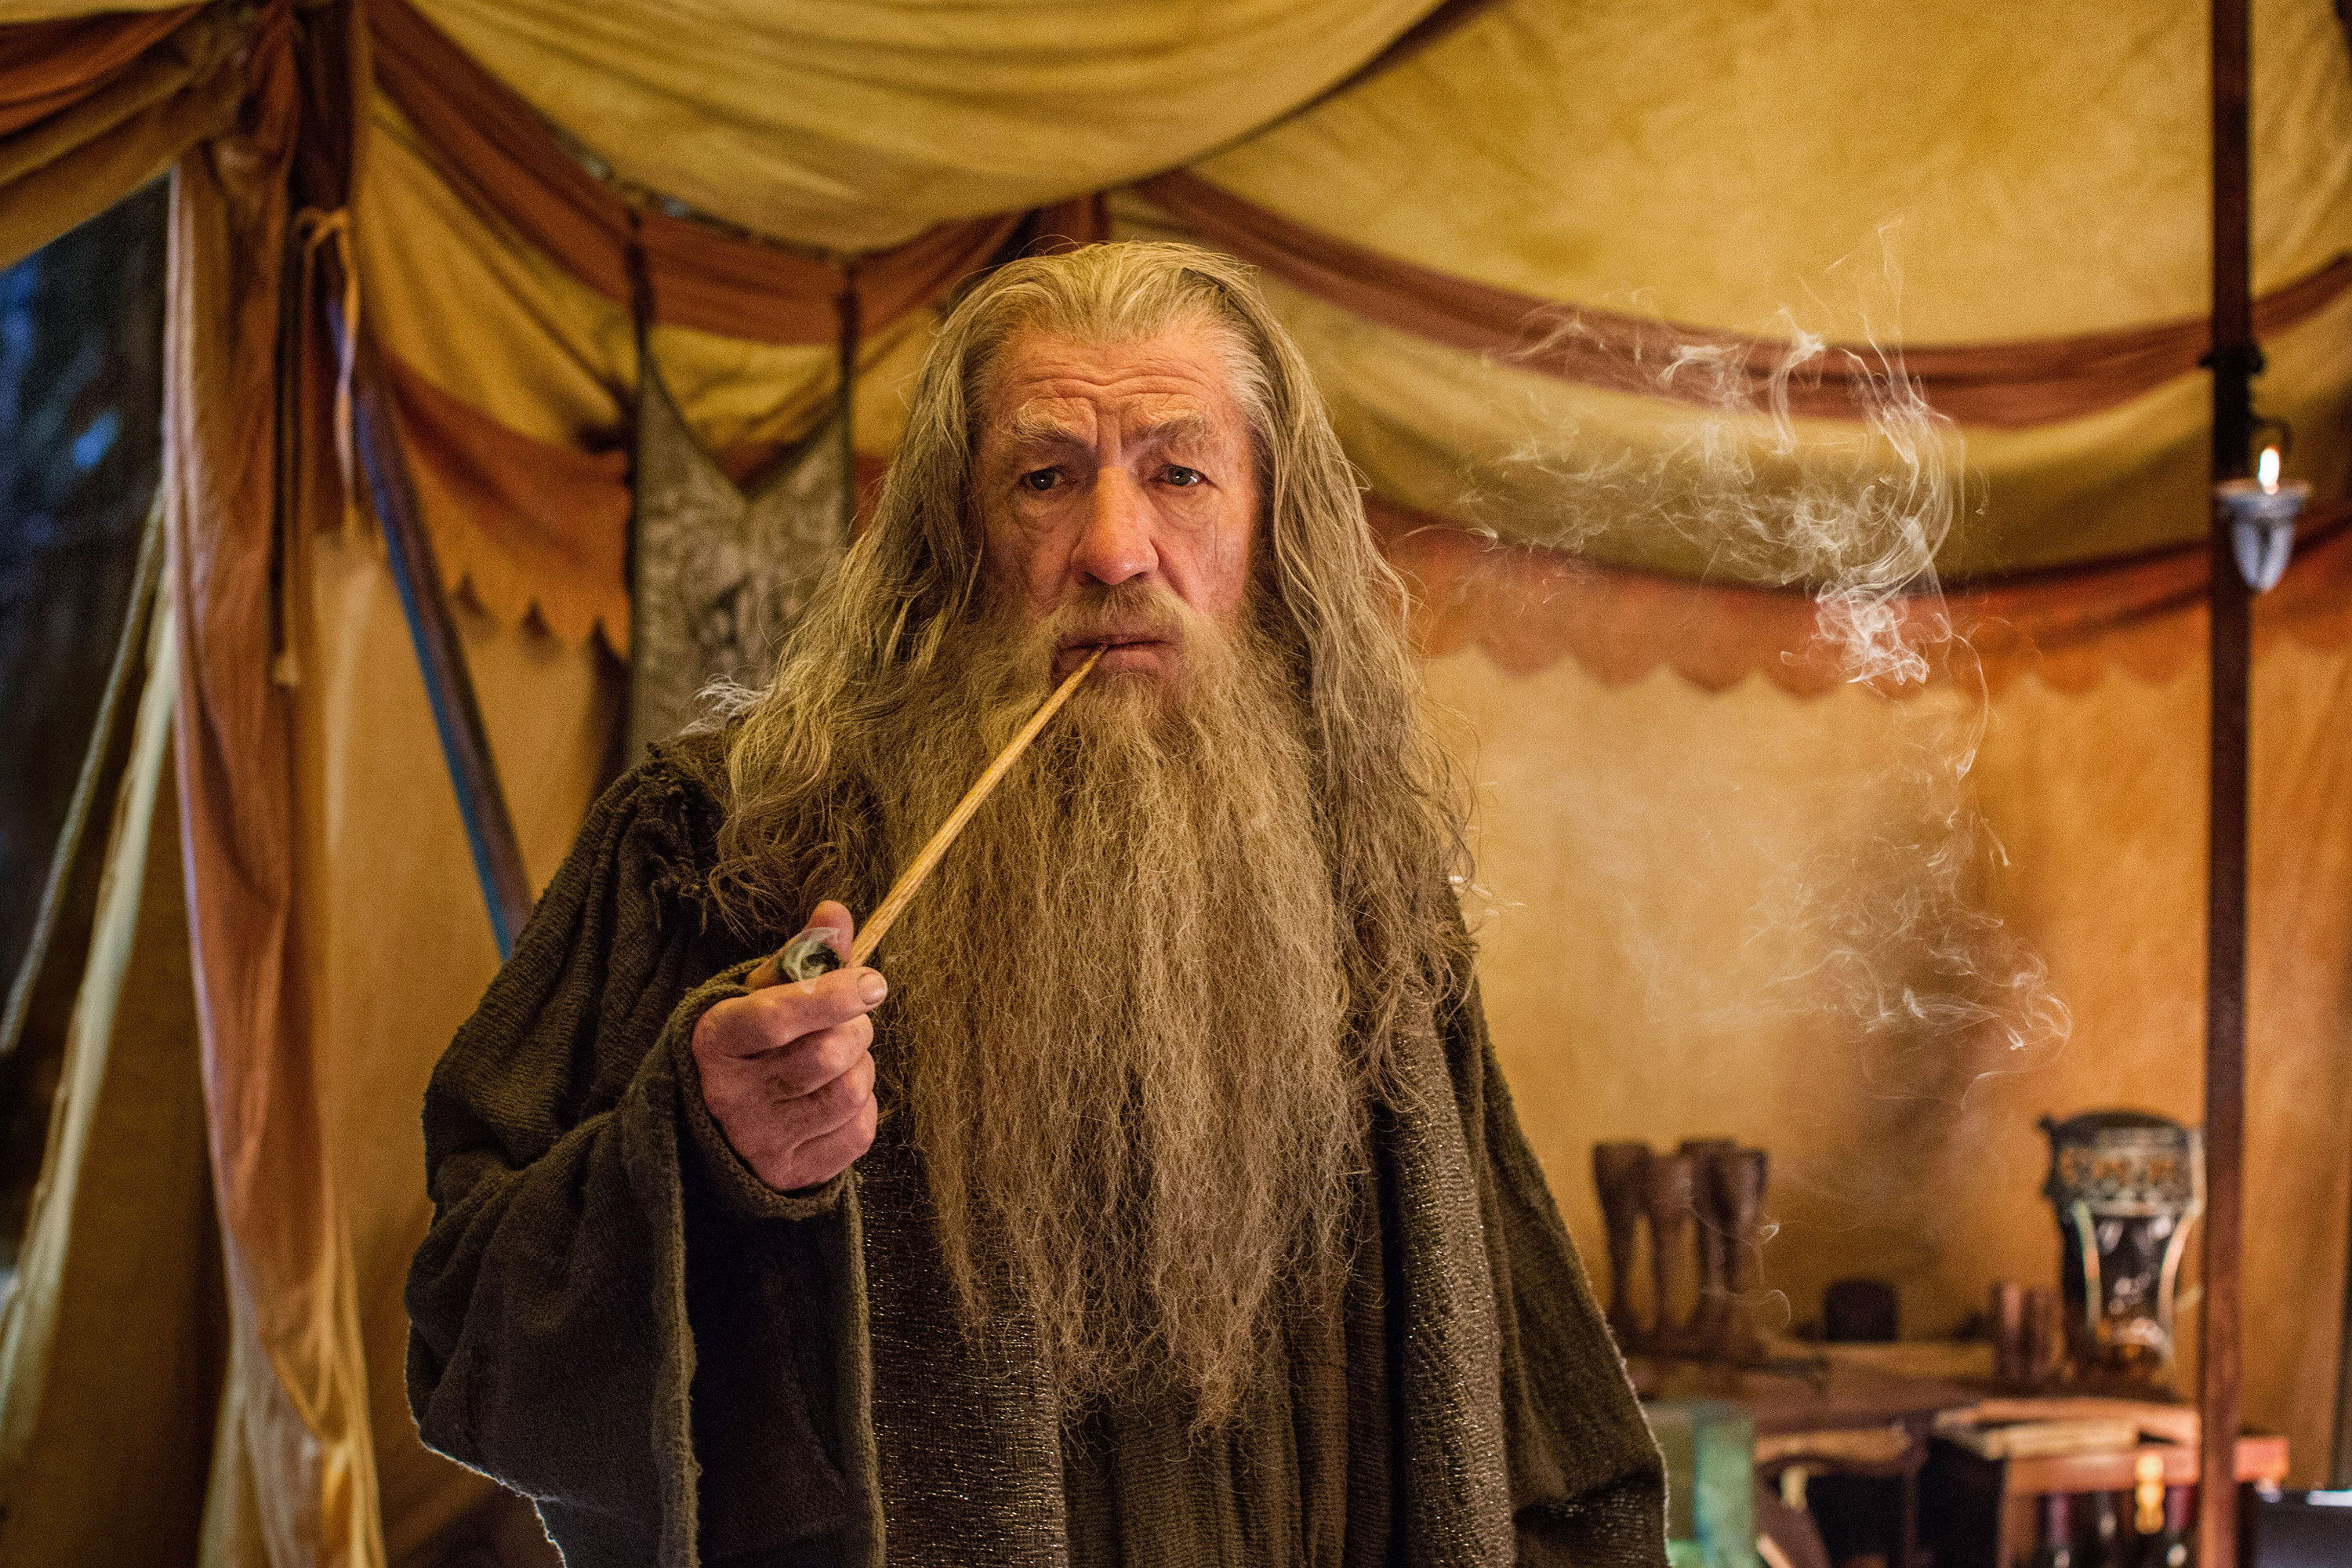 Gandalf smoking a long pipe in a tent